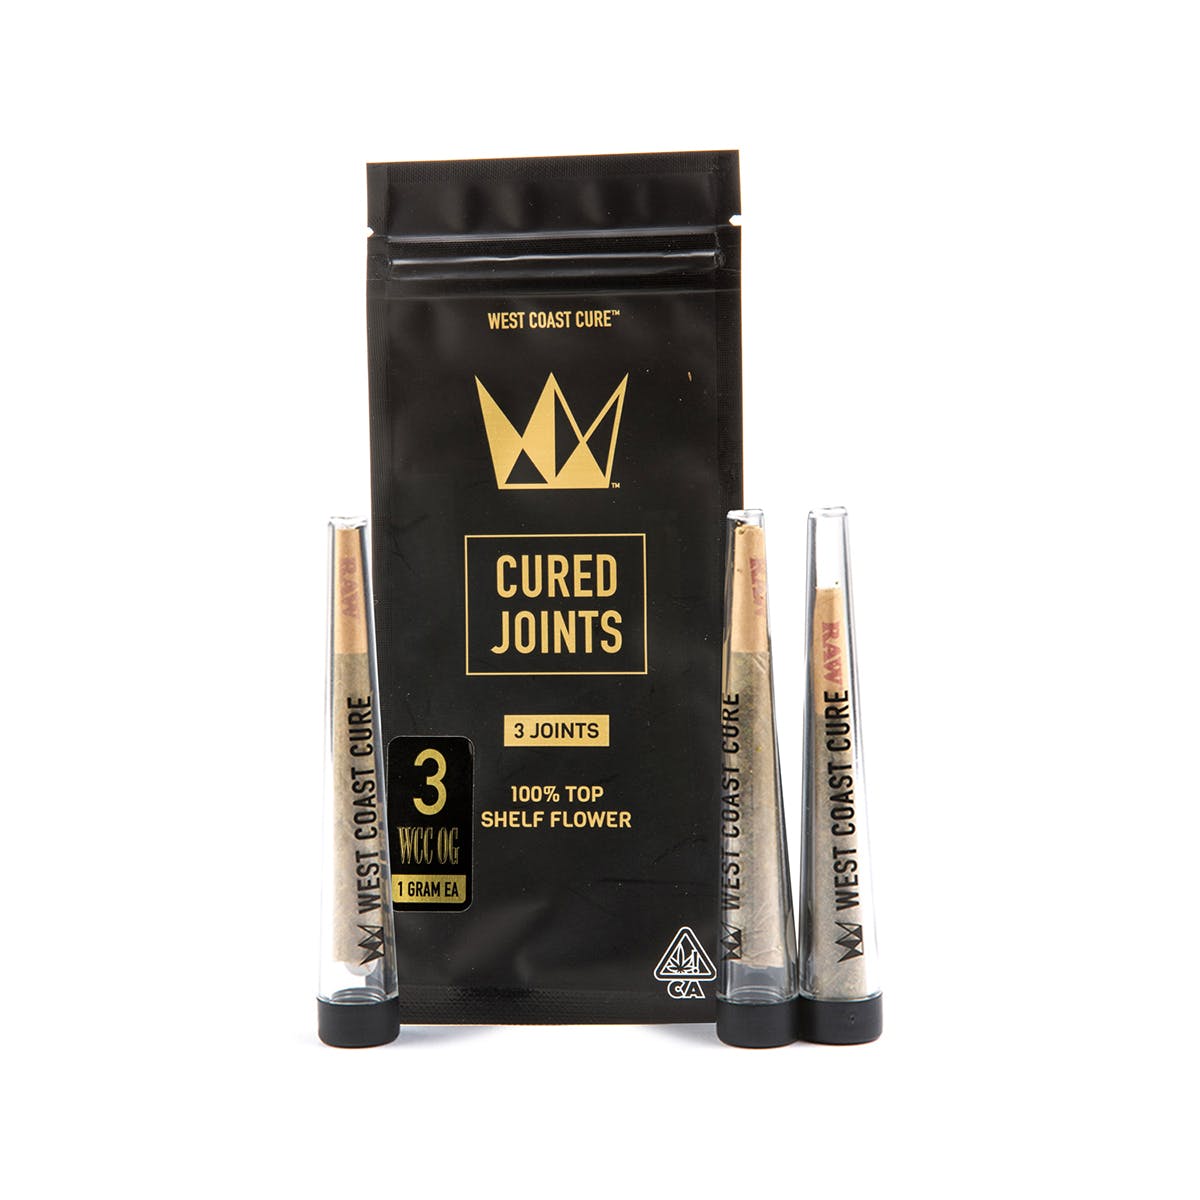 marijuana-dispensaries-harbor-holy-fire-in-costa-mesa-3pc-cured-joints-wcc-og